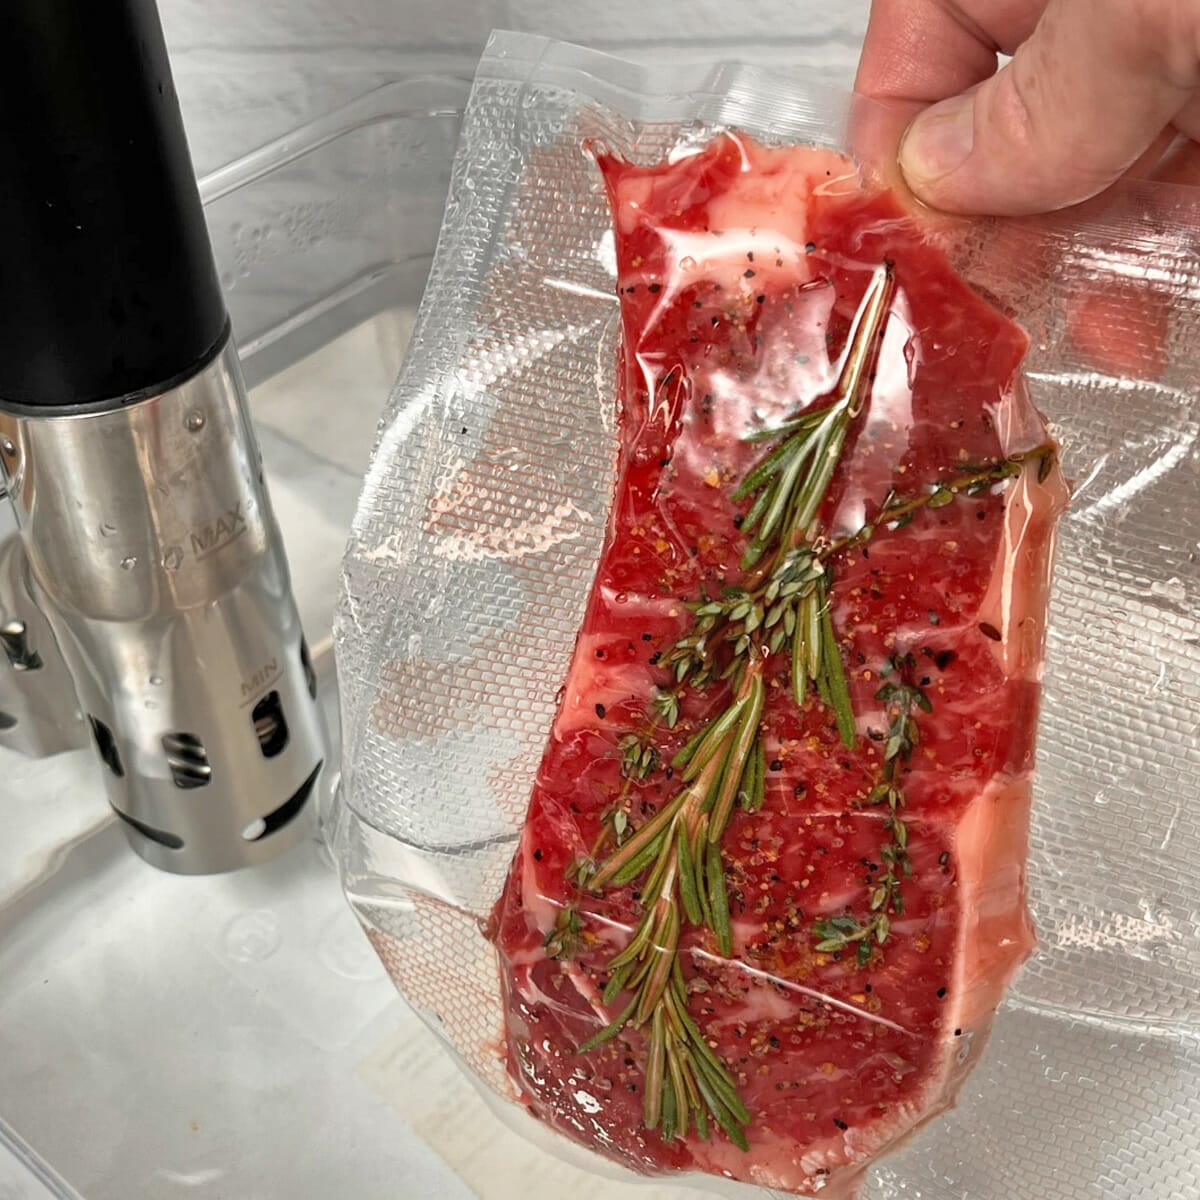 Sous Vide Cooking, How to Sous Vide Meat with Example